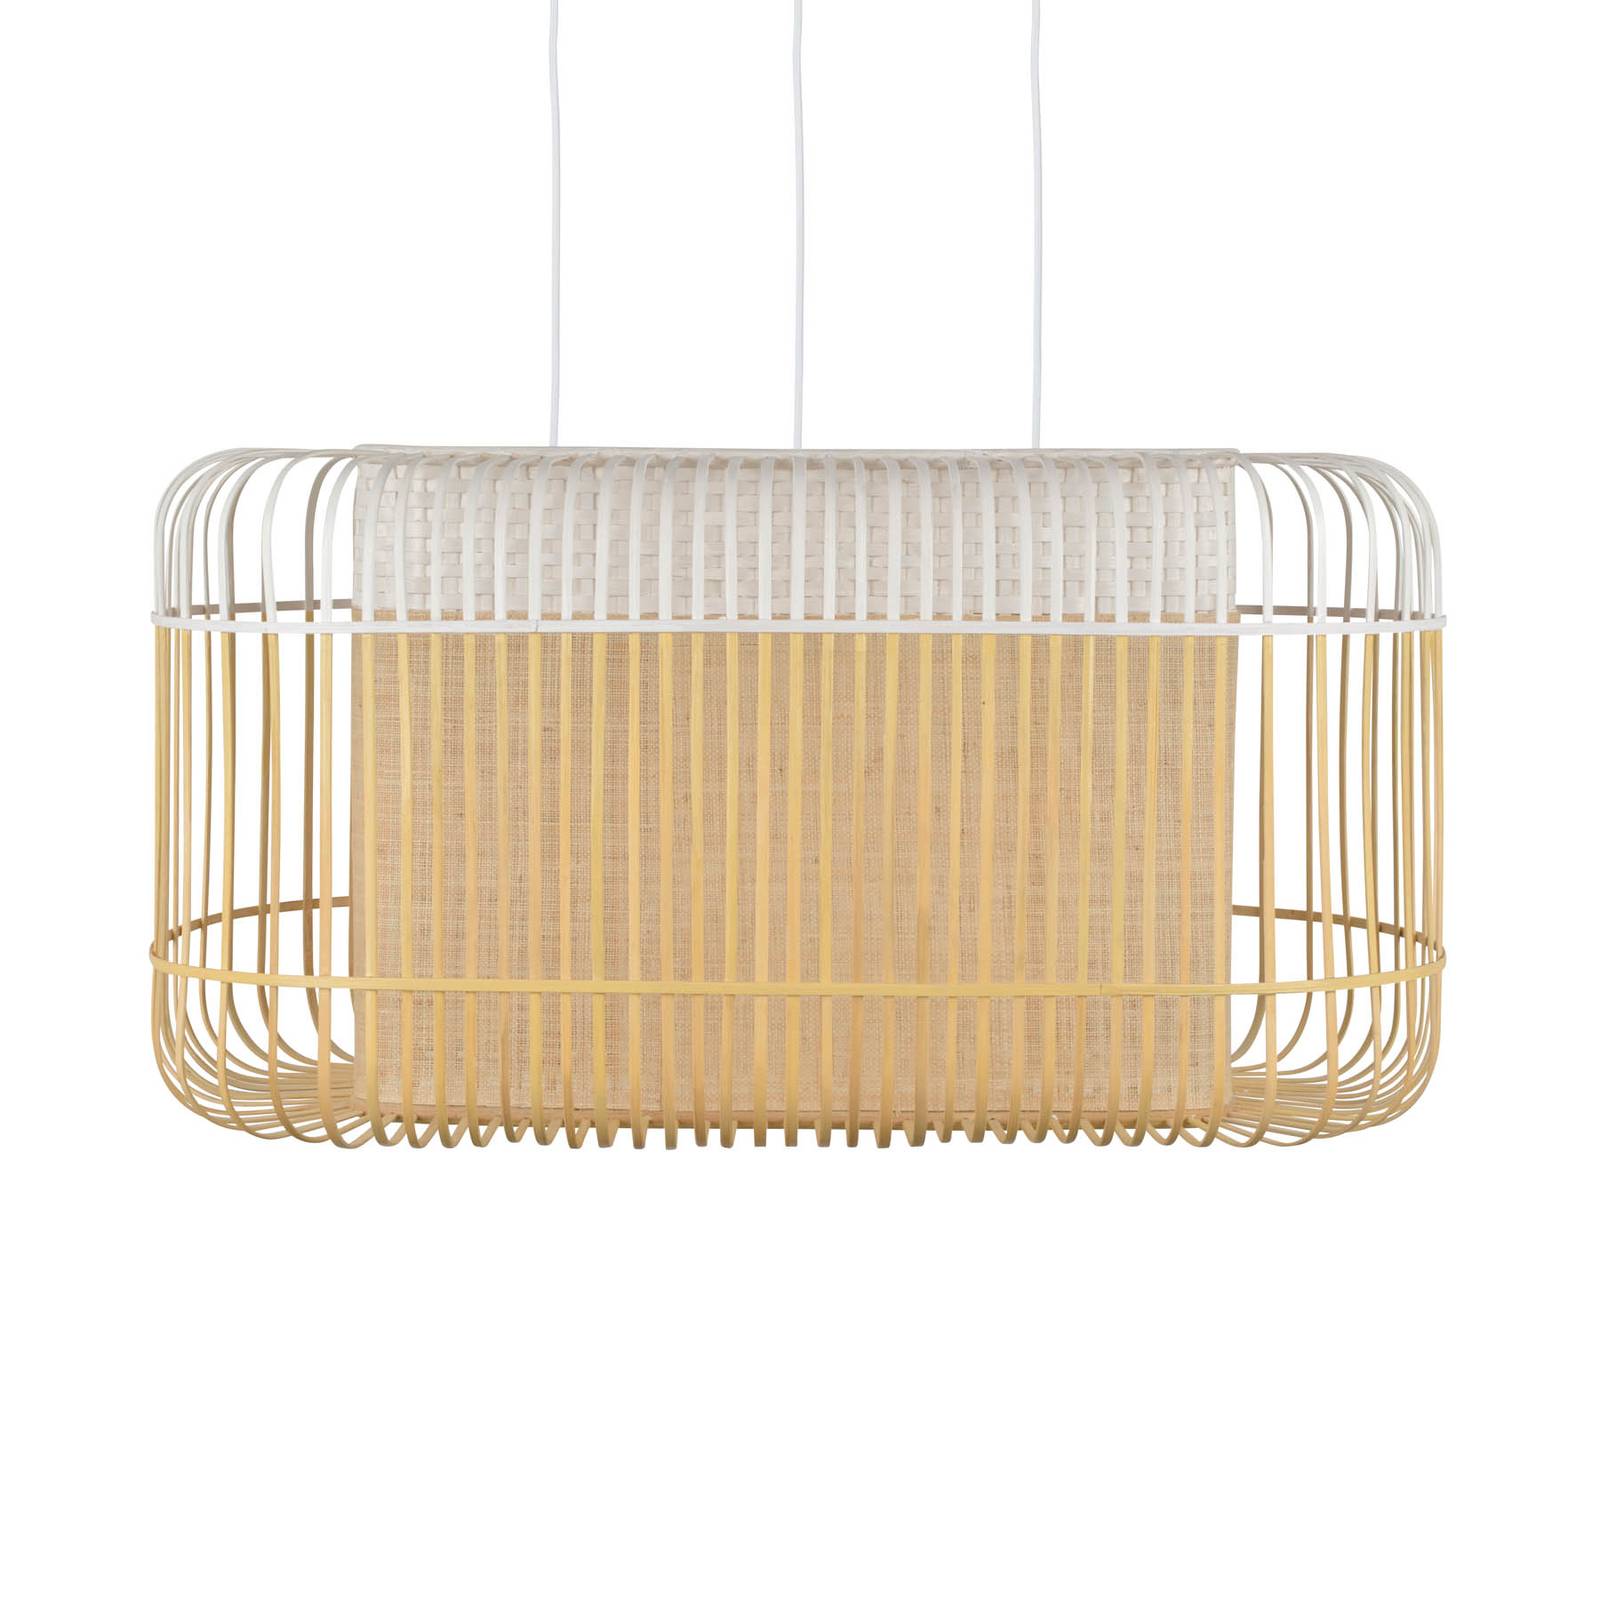 Image of Forestier Bamboo oval XL Suspension blanche/naturelle 3700663920390